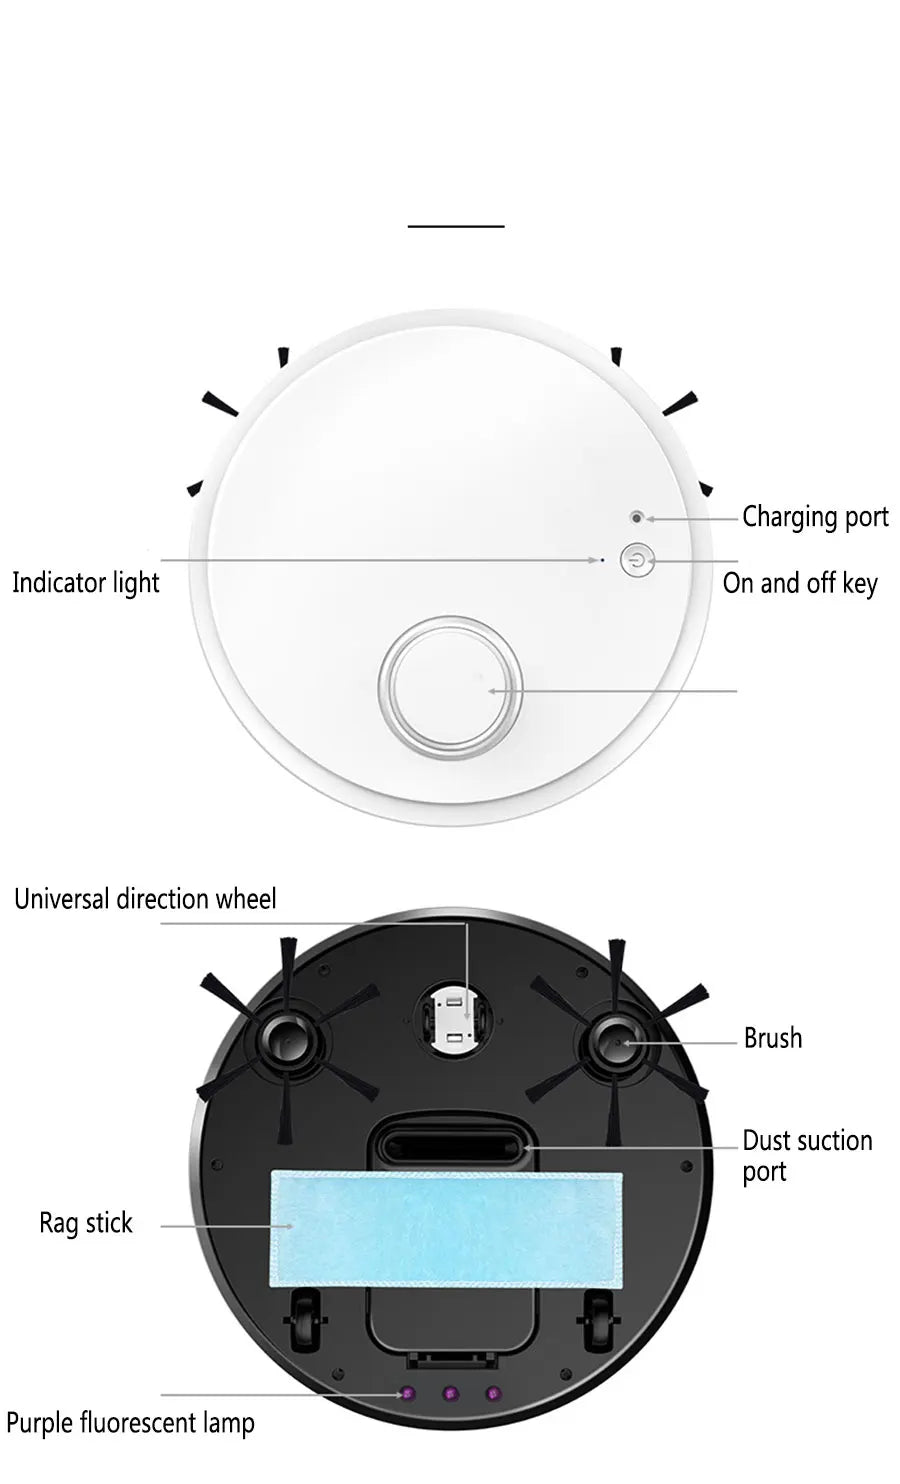 Automatic Smart Robot Vacuum Cleaner 3-in-1